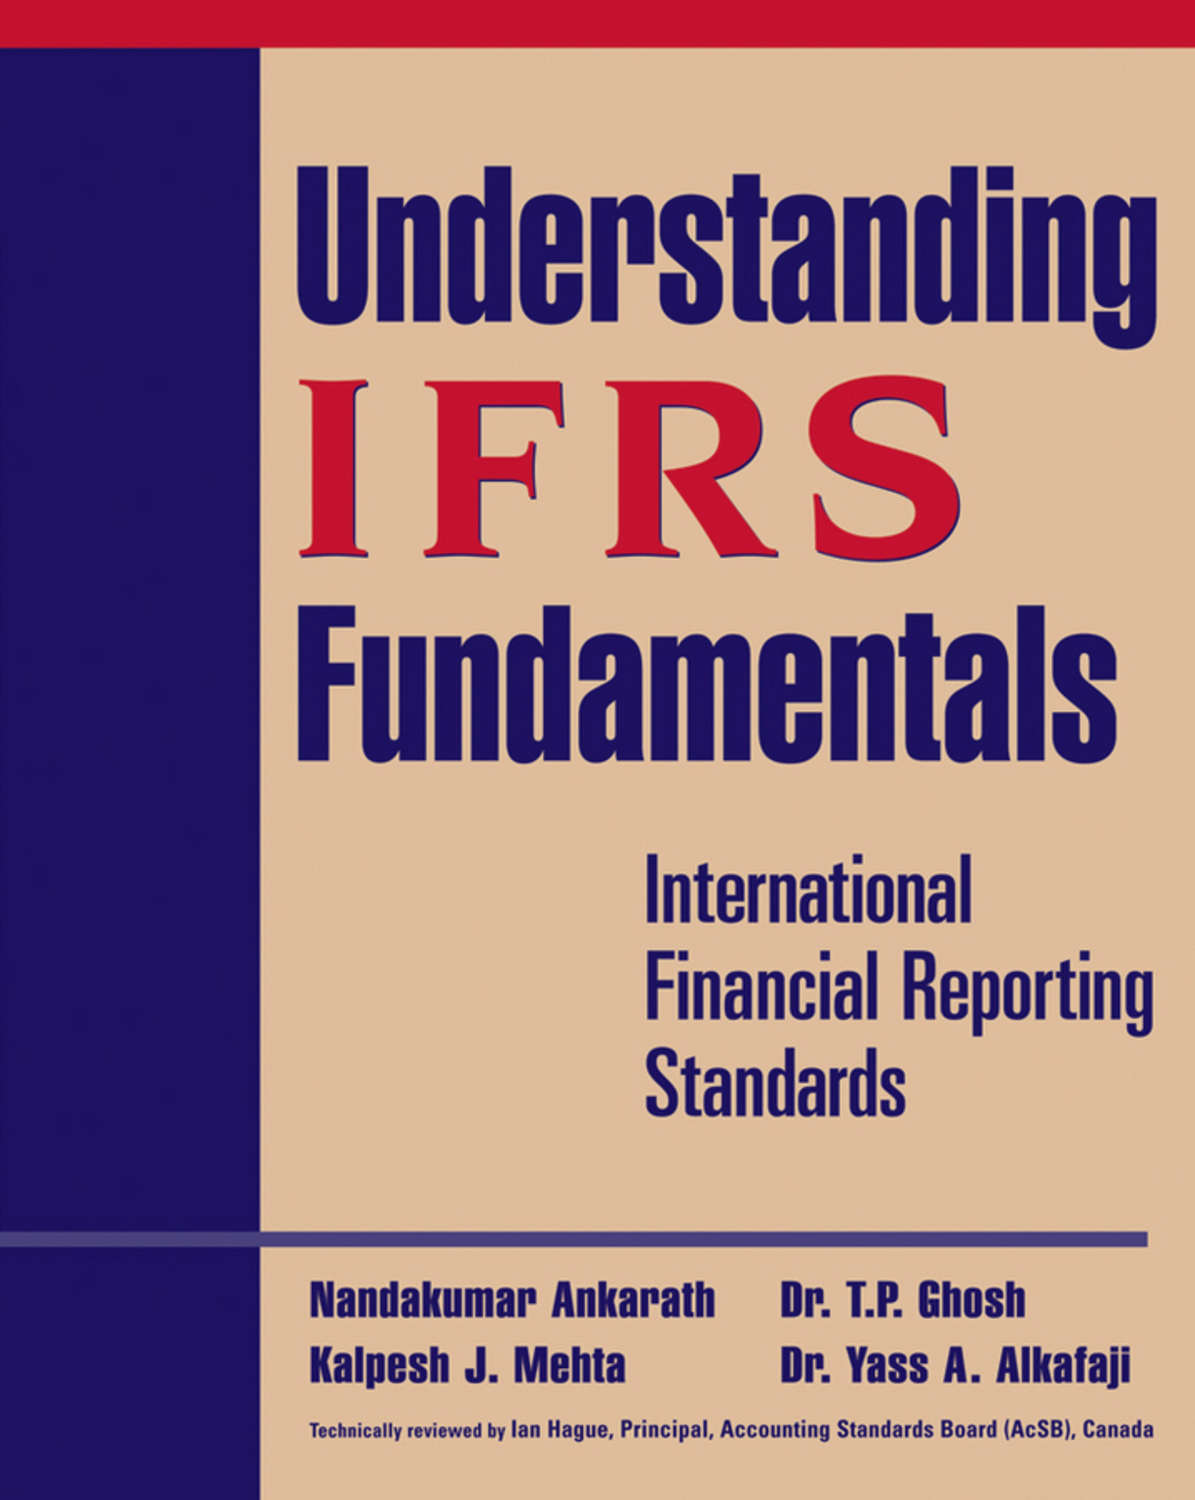 IFRS Standards. IFRS books. Книга обложка IFRS. IFRS 4. Standard report